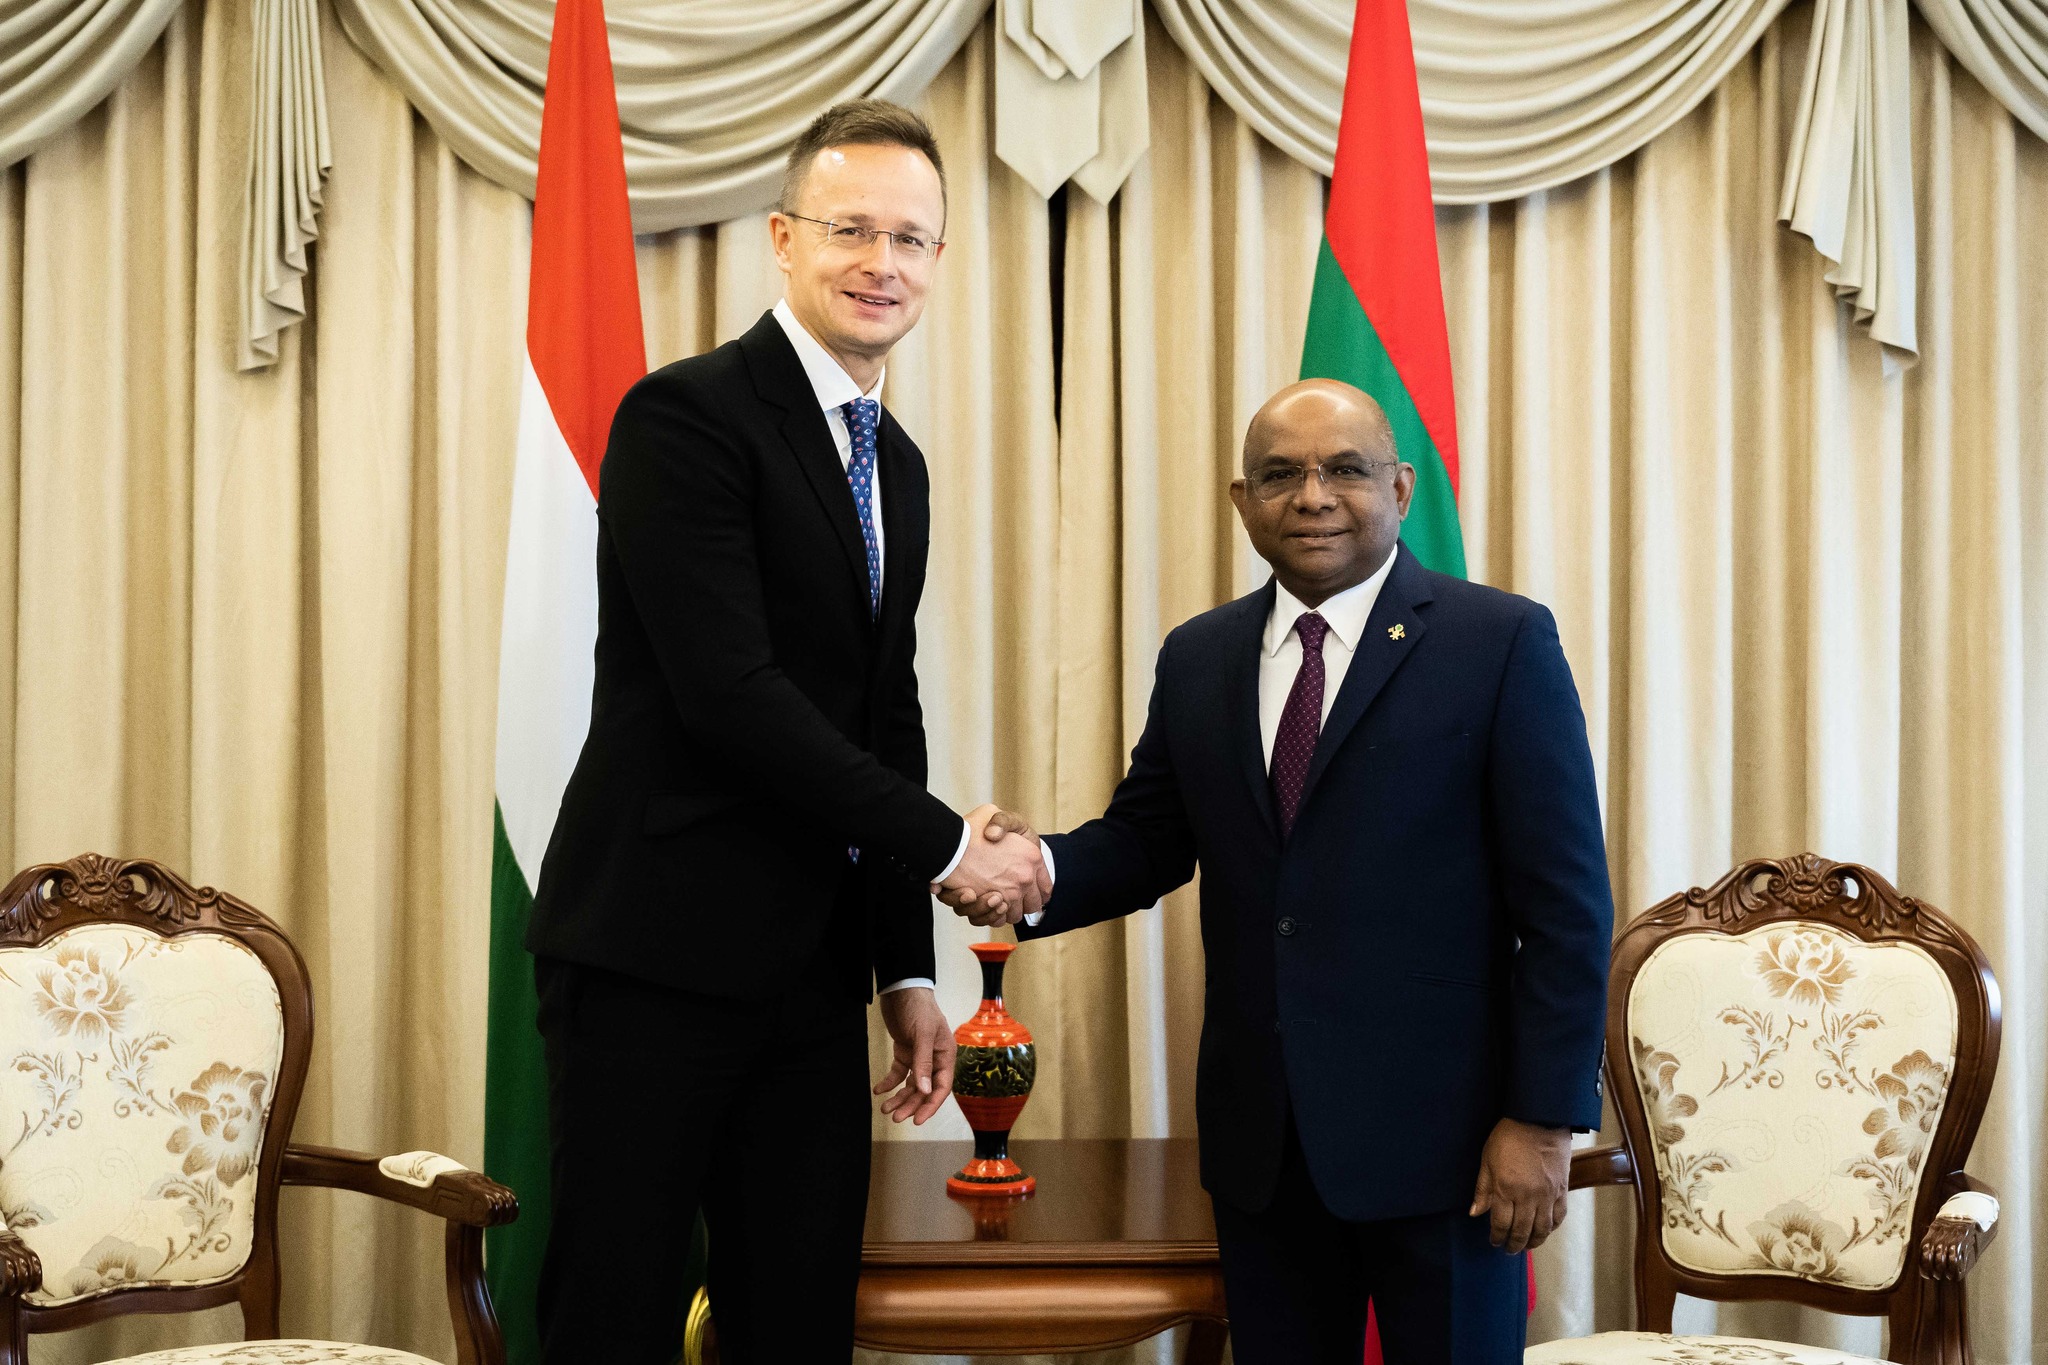 Maldives Signs Extensive New Cooperation Agreement With Hungary